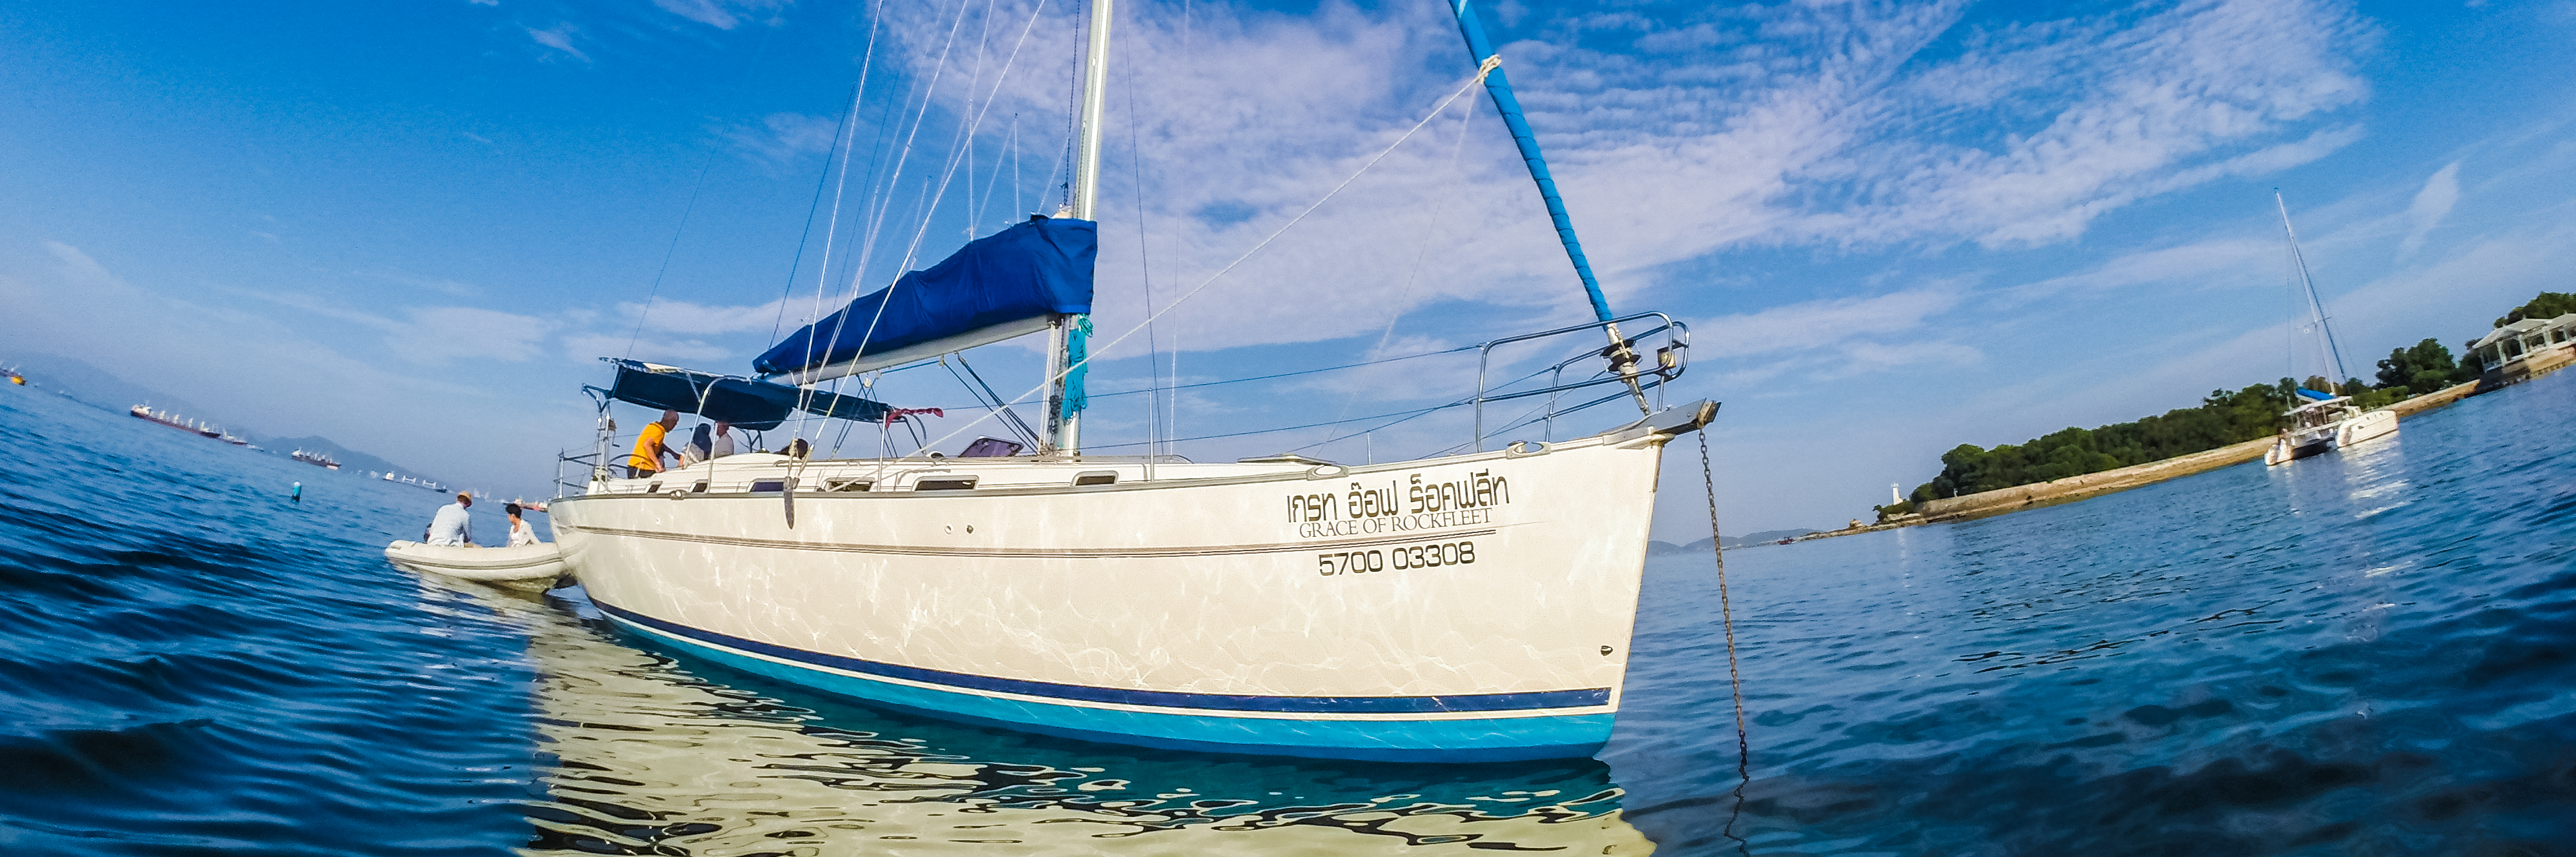 Cyclades 44.3 - Yacht Charter Koh Chang & Boat hire in Thailand Koh Chang Ao Salak Phet 5